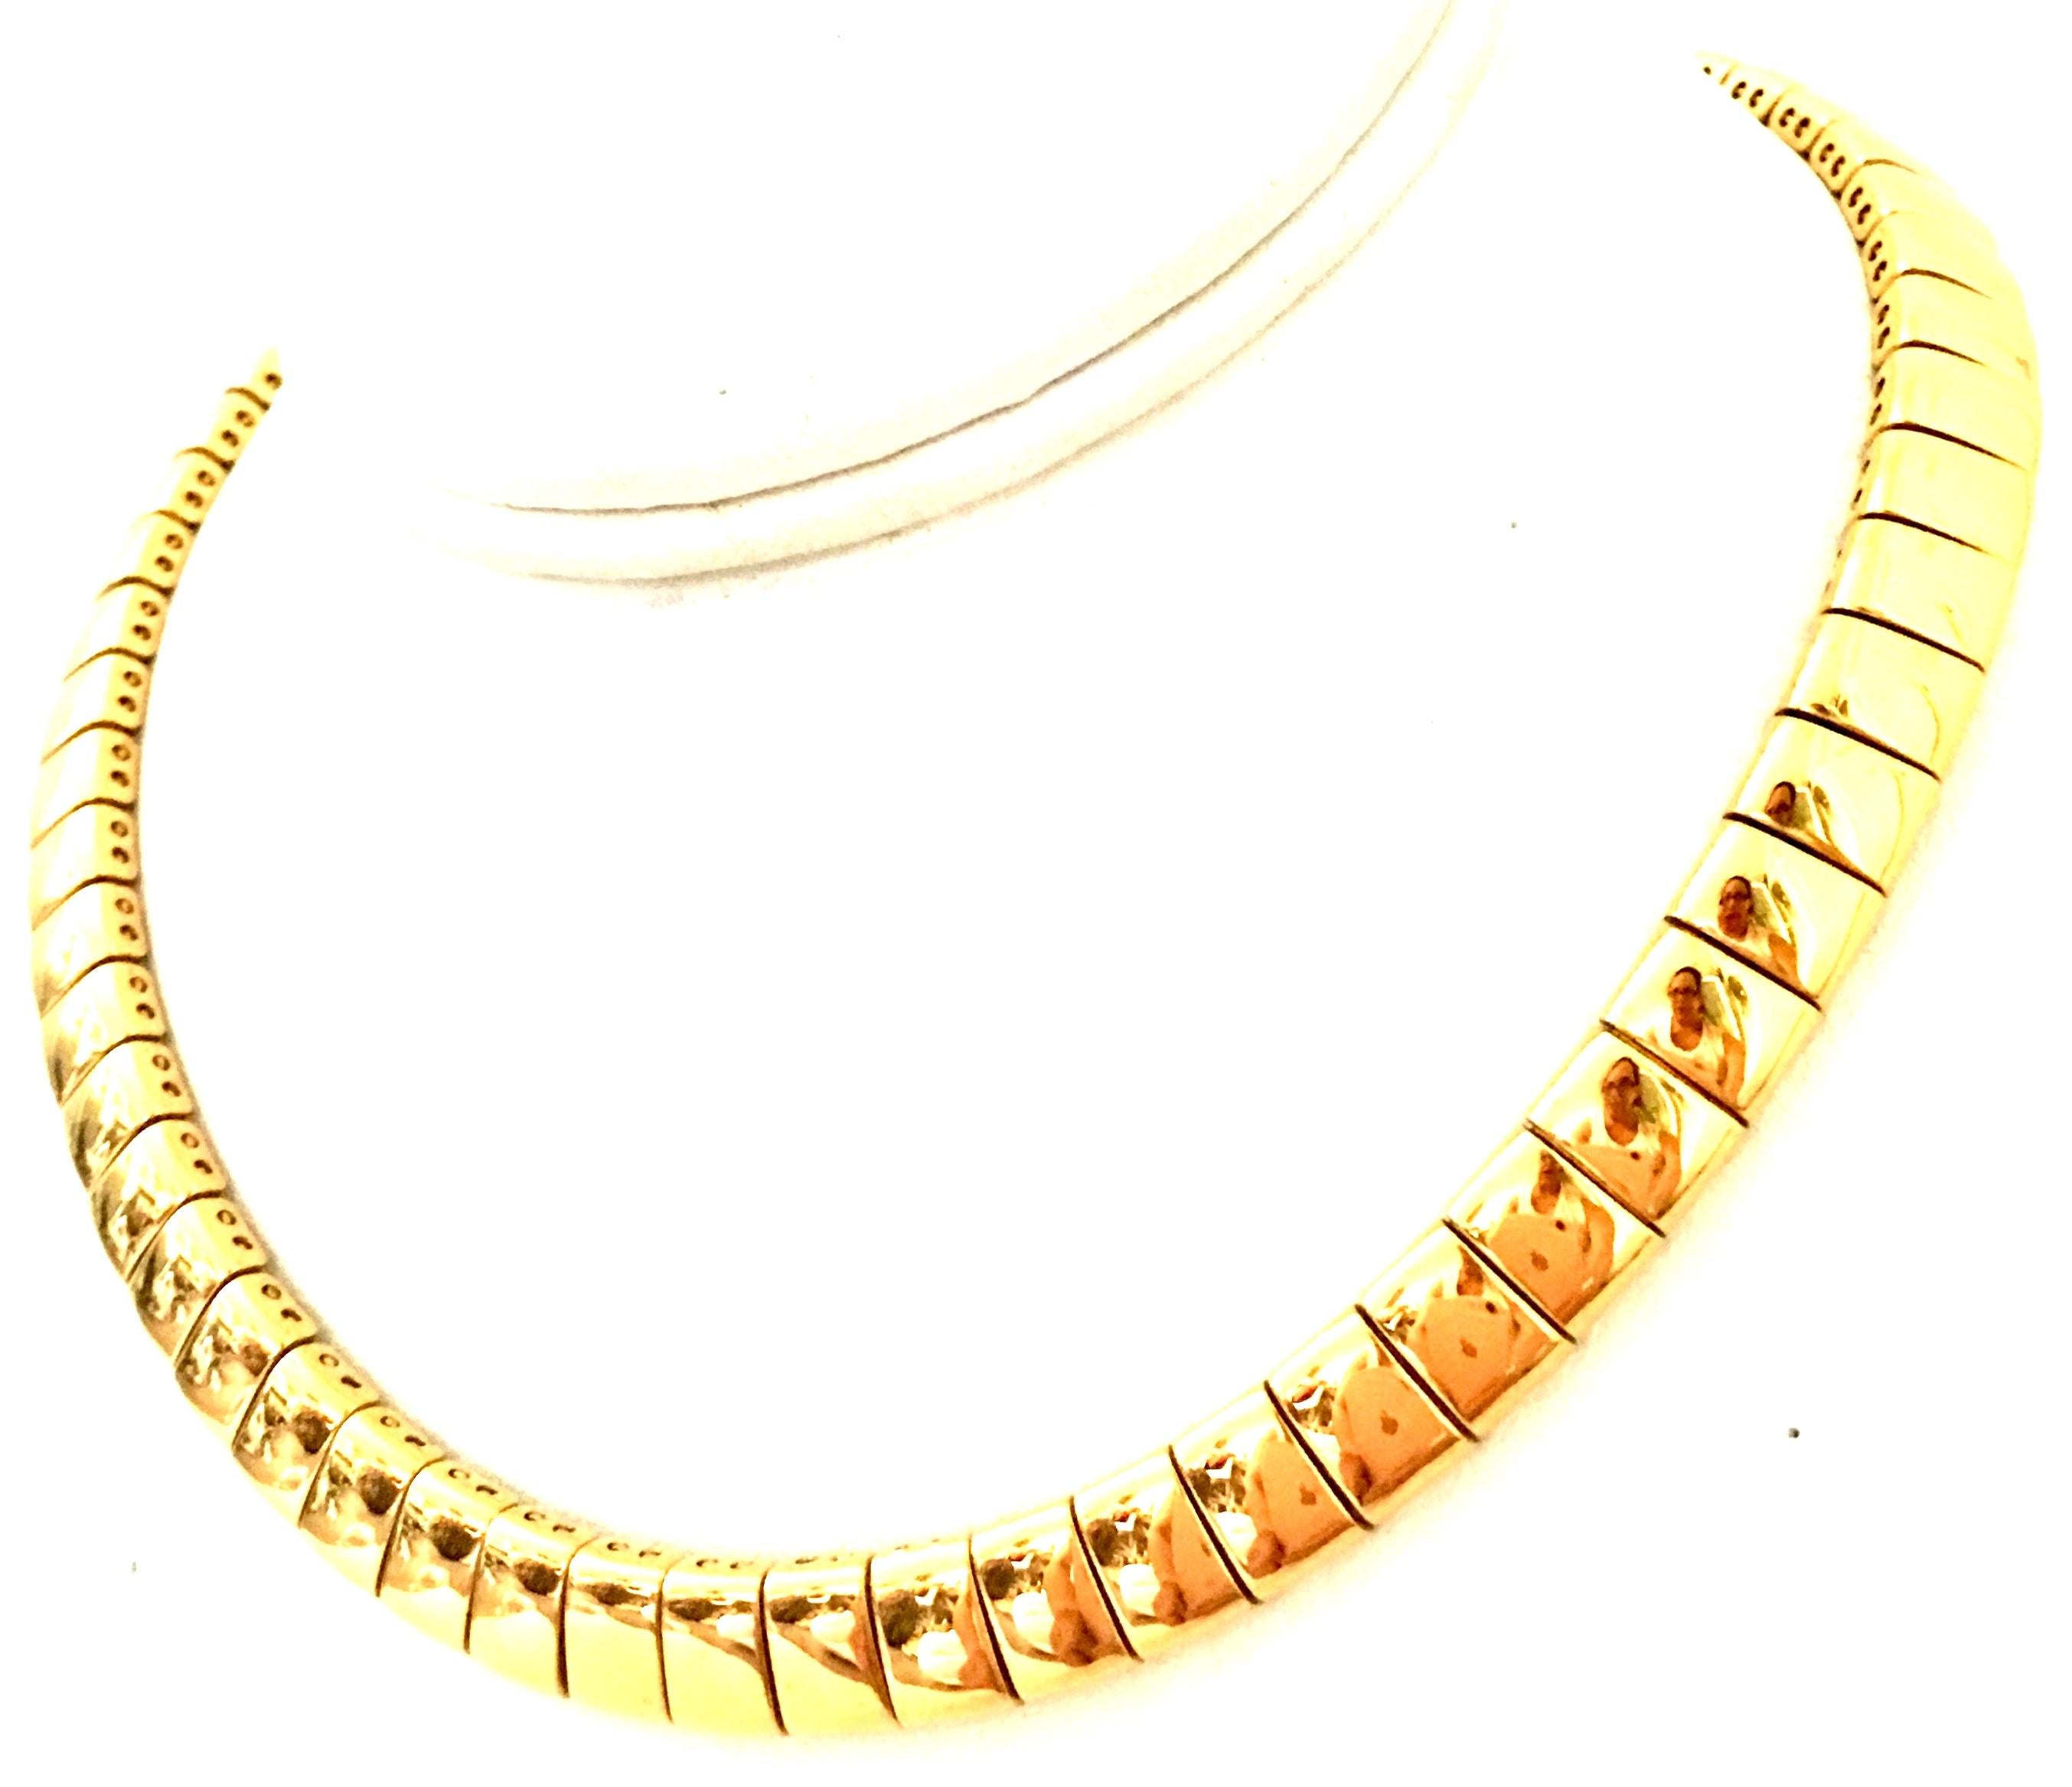 20th Century Italian Gold Plate Link Choker Style Necklace By, Napier. This modernist, classic and timeless piece features curved square links of approximately, .25